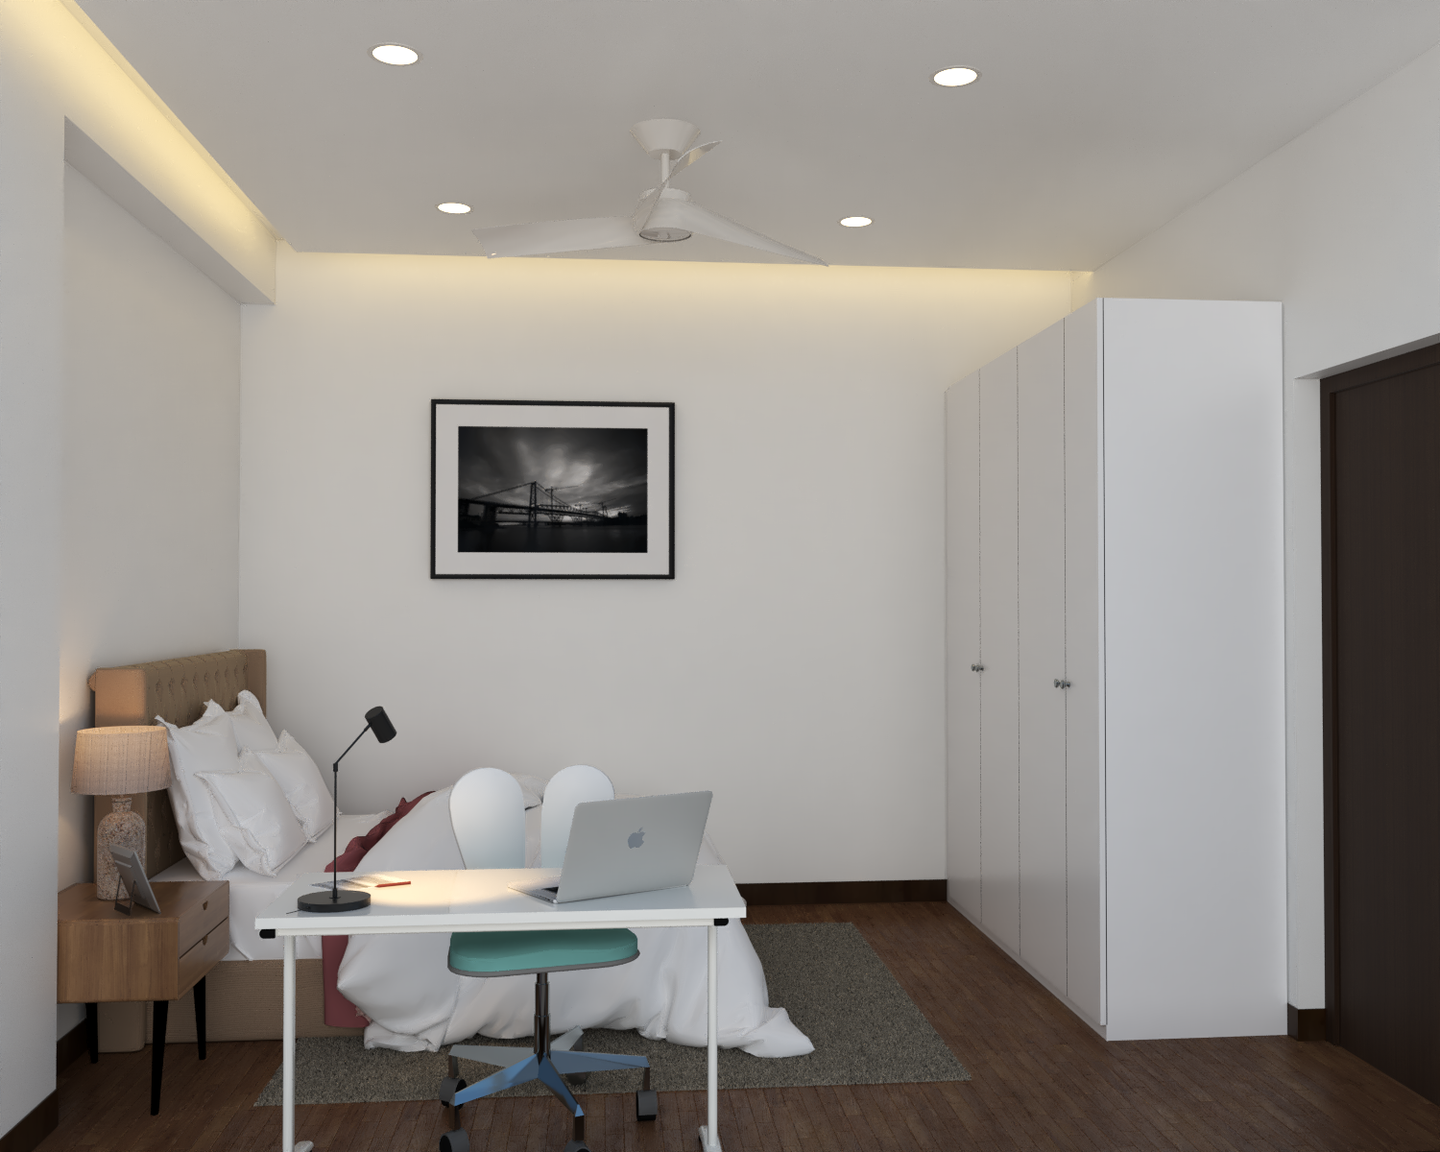 Compact Bedroom Interior Design with Study Desk and False Ceiling - Livspace